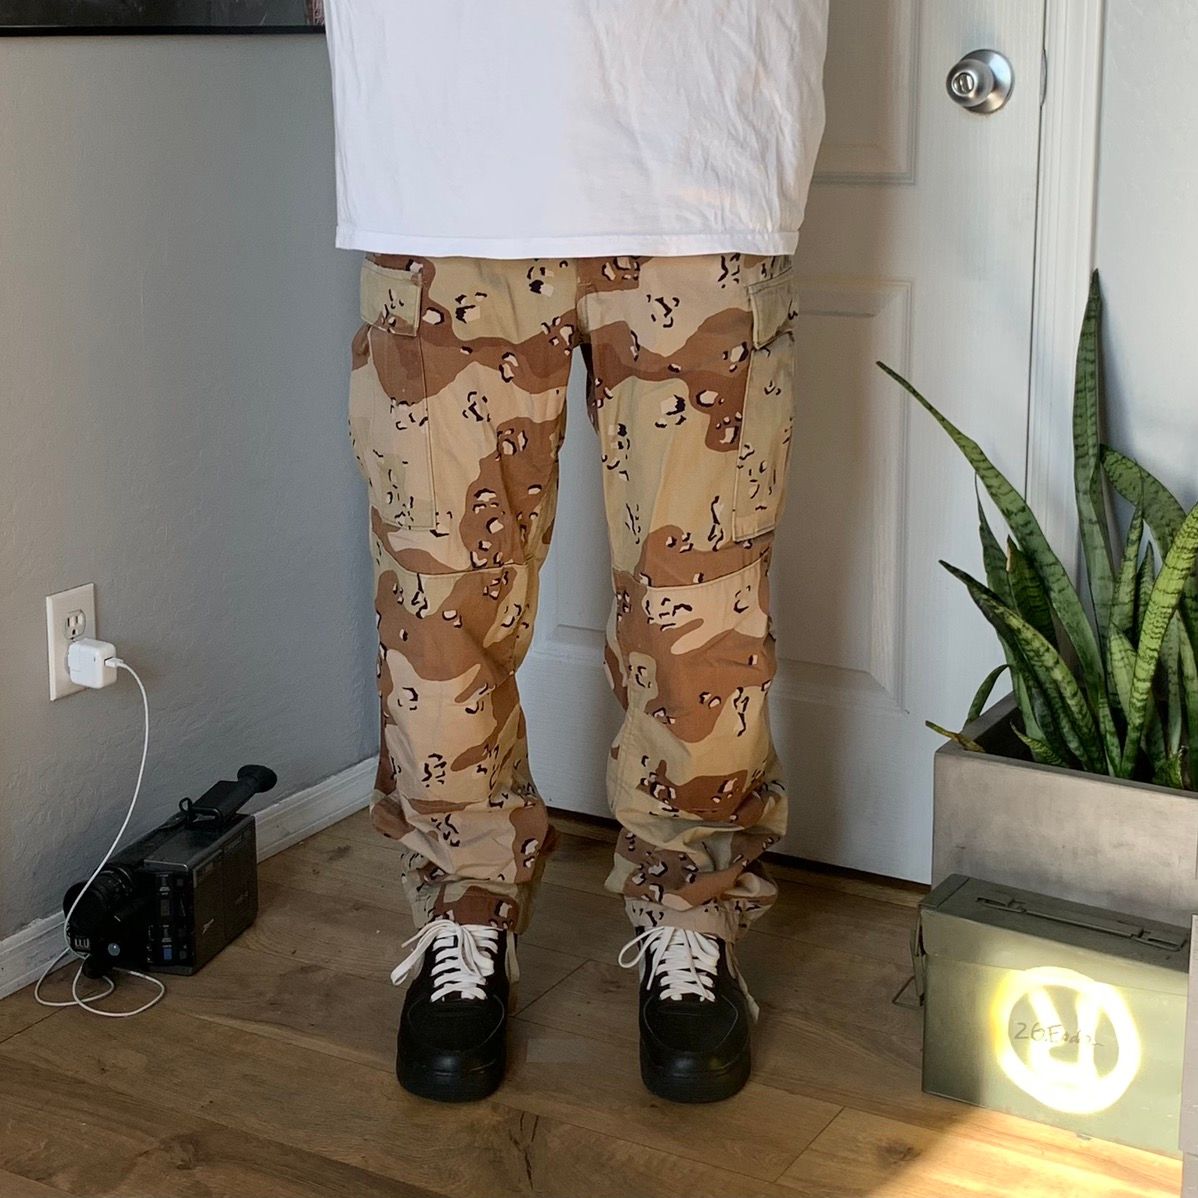 desert camo pants — reworked vintage clothing and much more!